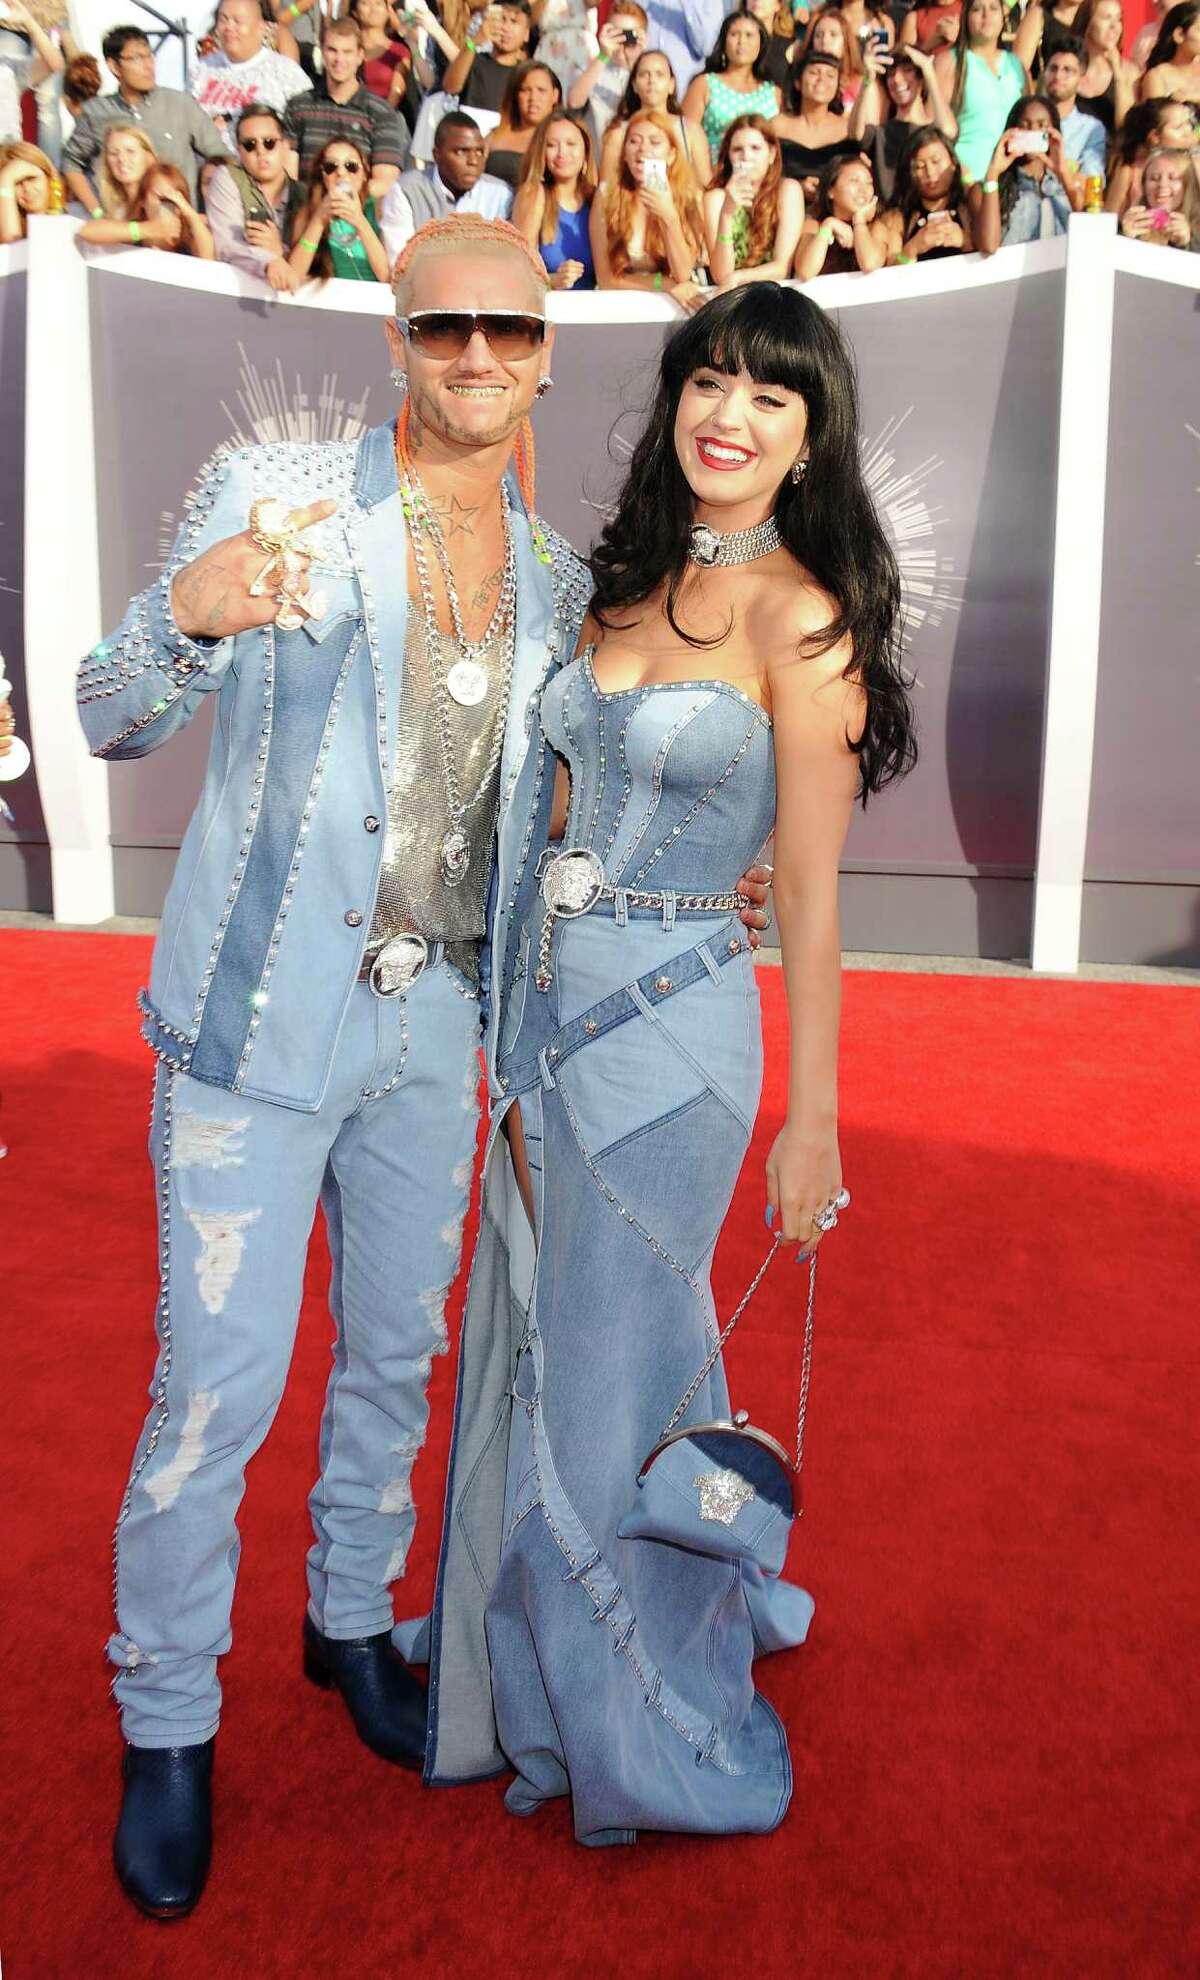 Worst Justin and Britney from Nightmare Land...oh never mind, it's Katy Perry and Houston's own Riff Raff, who apparently met when a hole developed in the space time continuum. Perry channeled Britney as part of a Twitter dare, and we have to say she outdid the waning pop star.